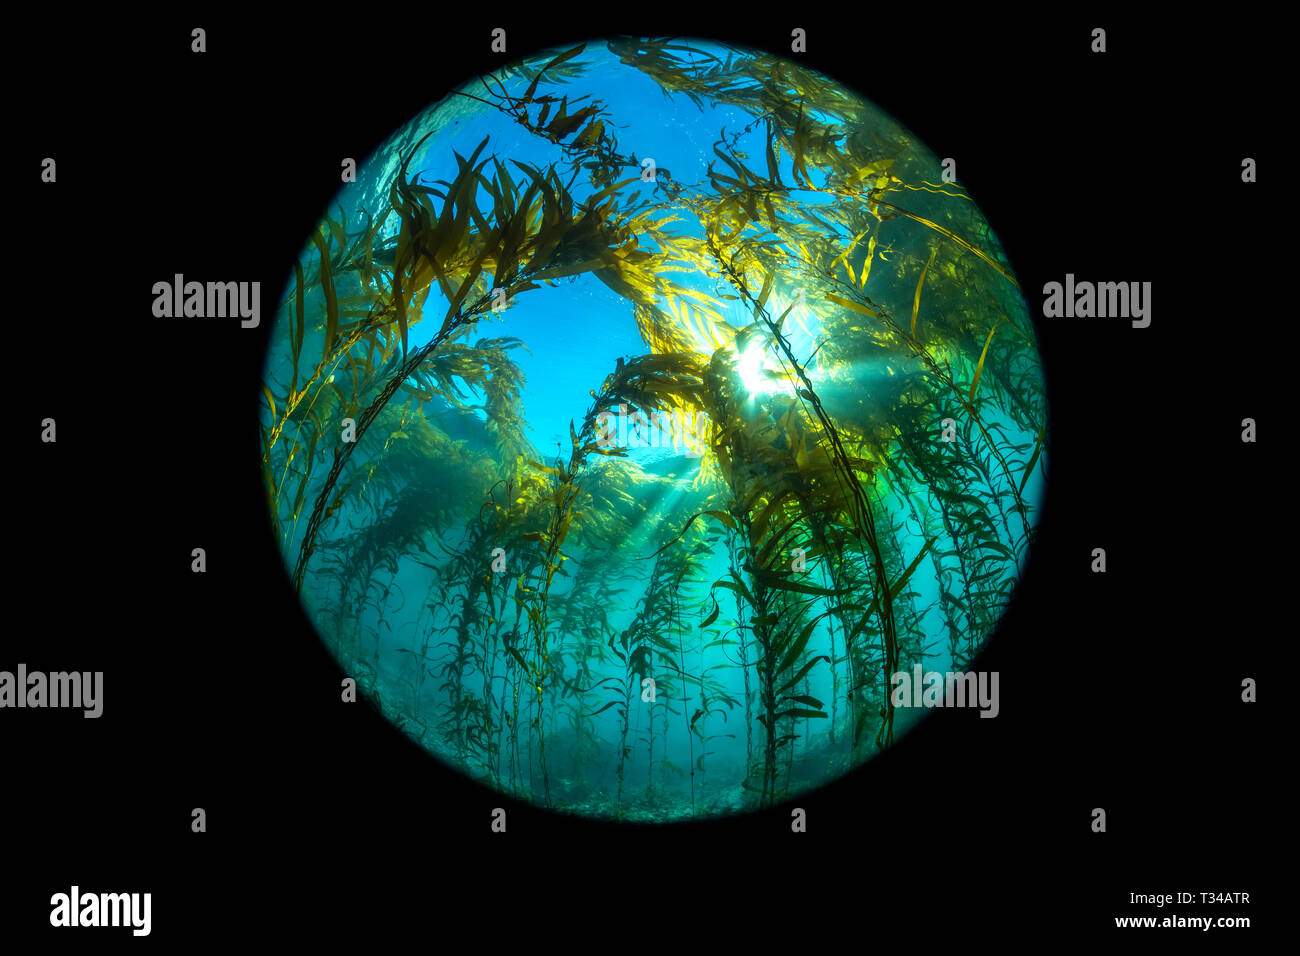 A wide circular fisheye perspective of a classic California kelp forest showing the canopy, blue water and reef structure. Stock Photo